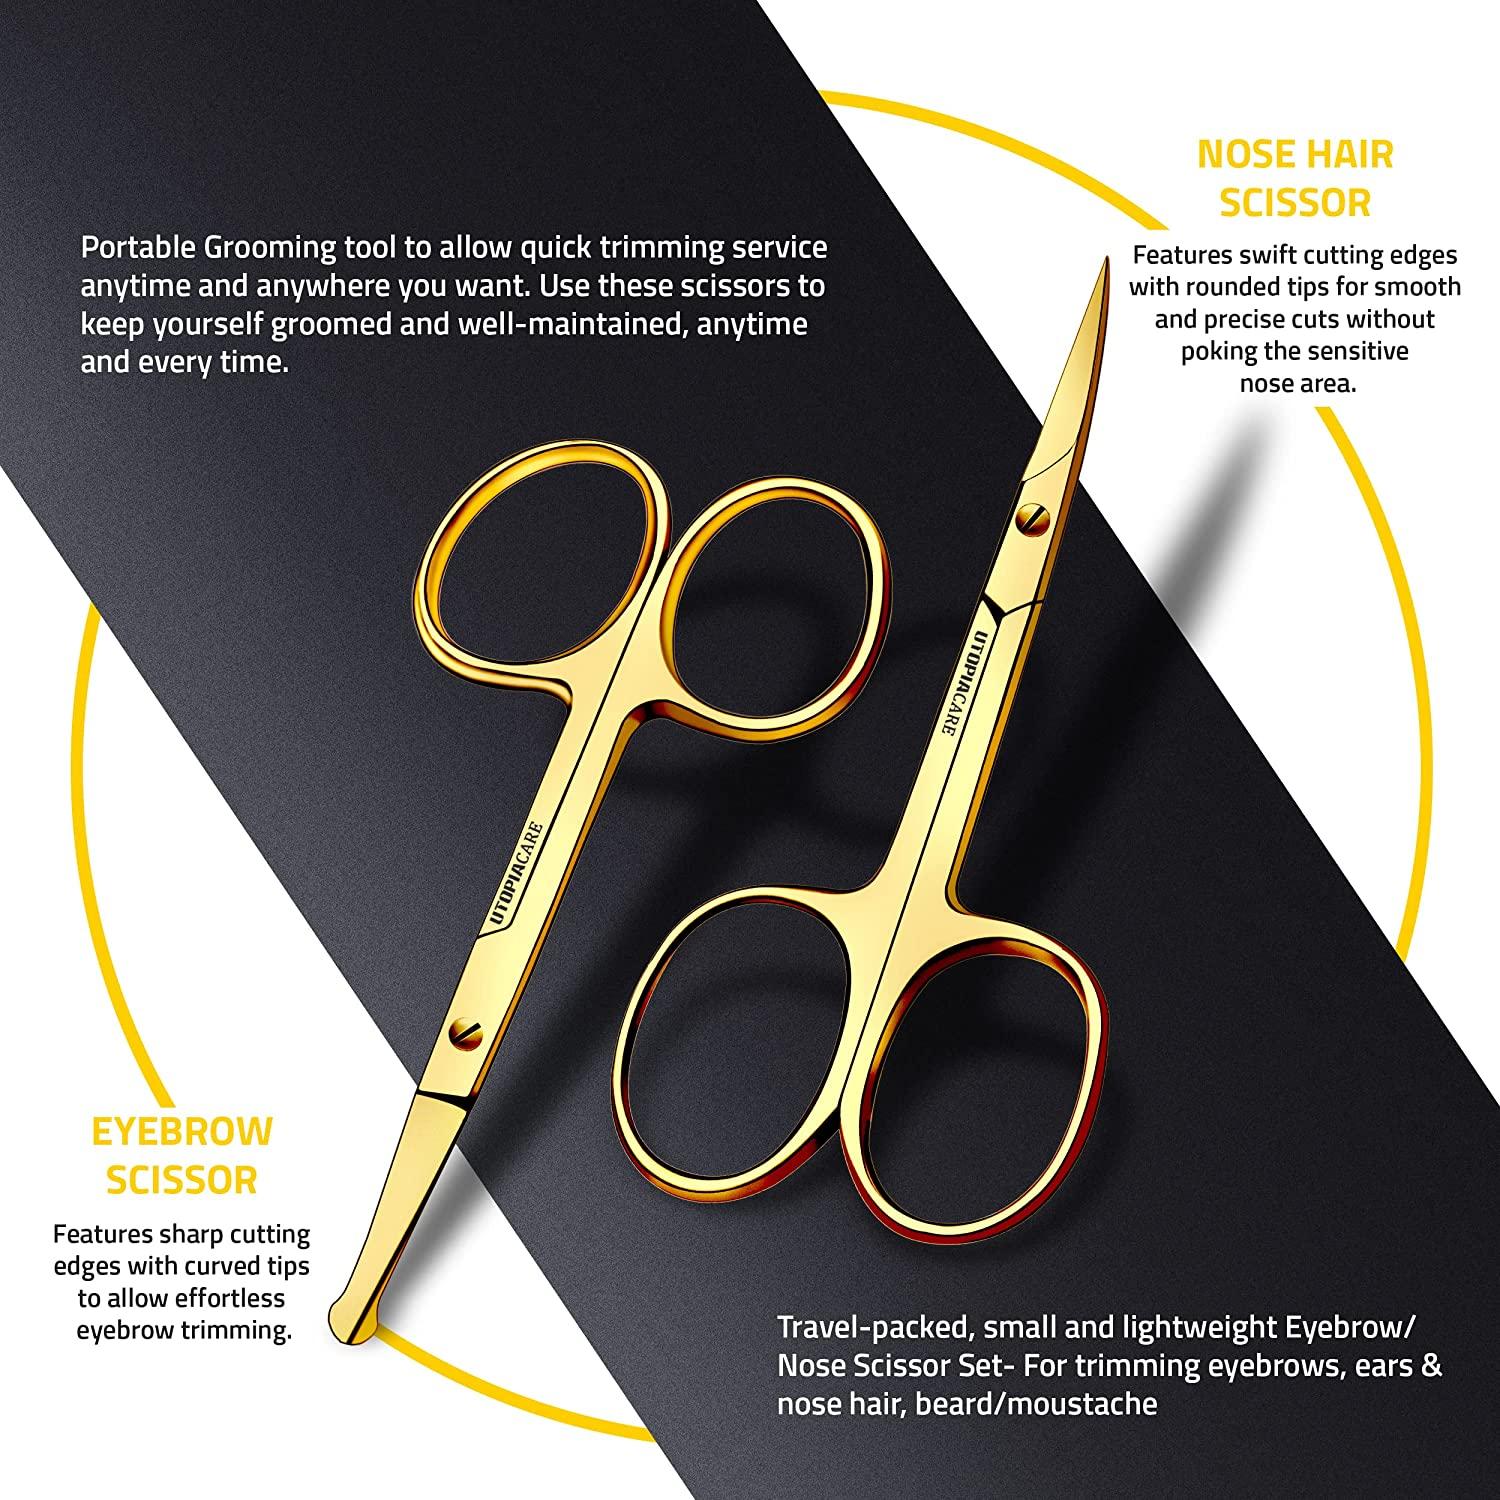 Utopia Care - Curved and Rounded Facial Hair Scissors for Men - Mustache,  Nose Hair & Beard Trimming Scissors, Safety Use for Eyebrows, Eyelashes,  and Ear Hair - Professional Stainless Steel (Gold)